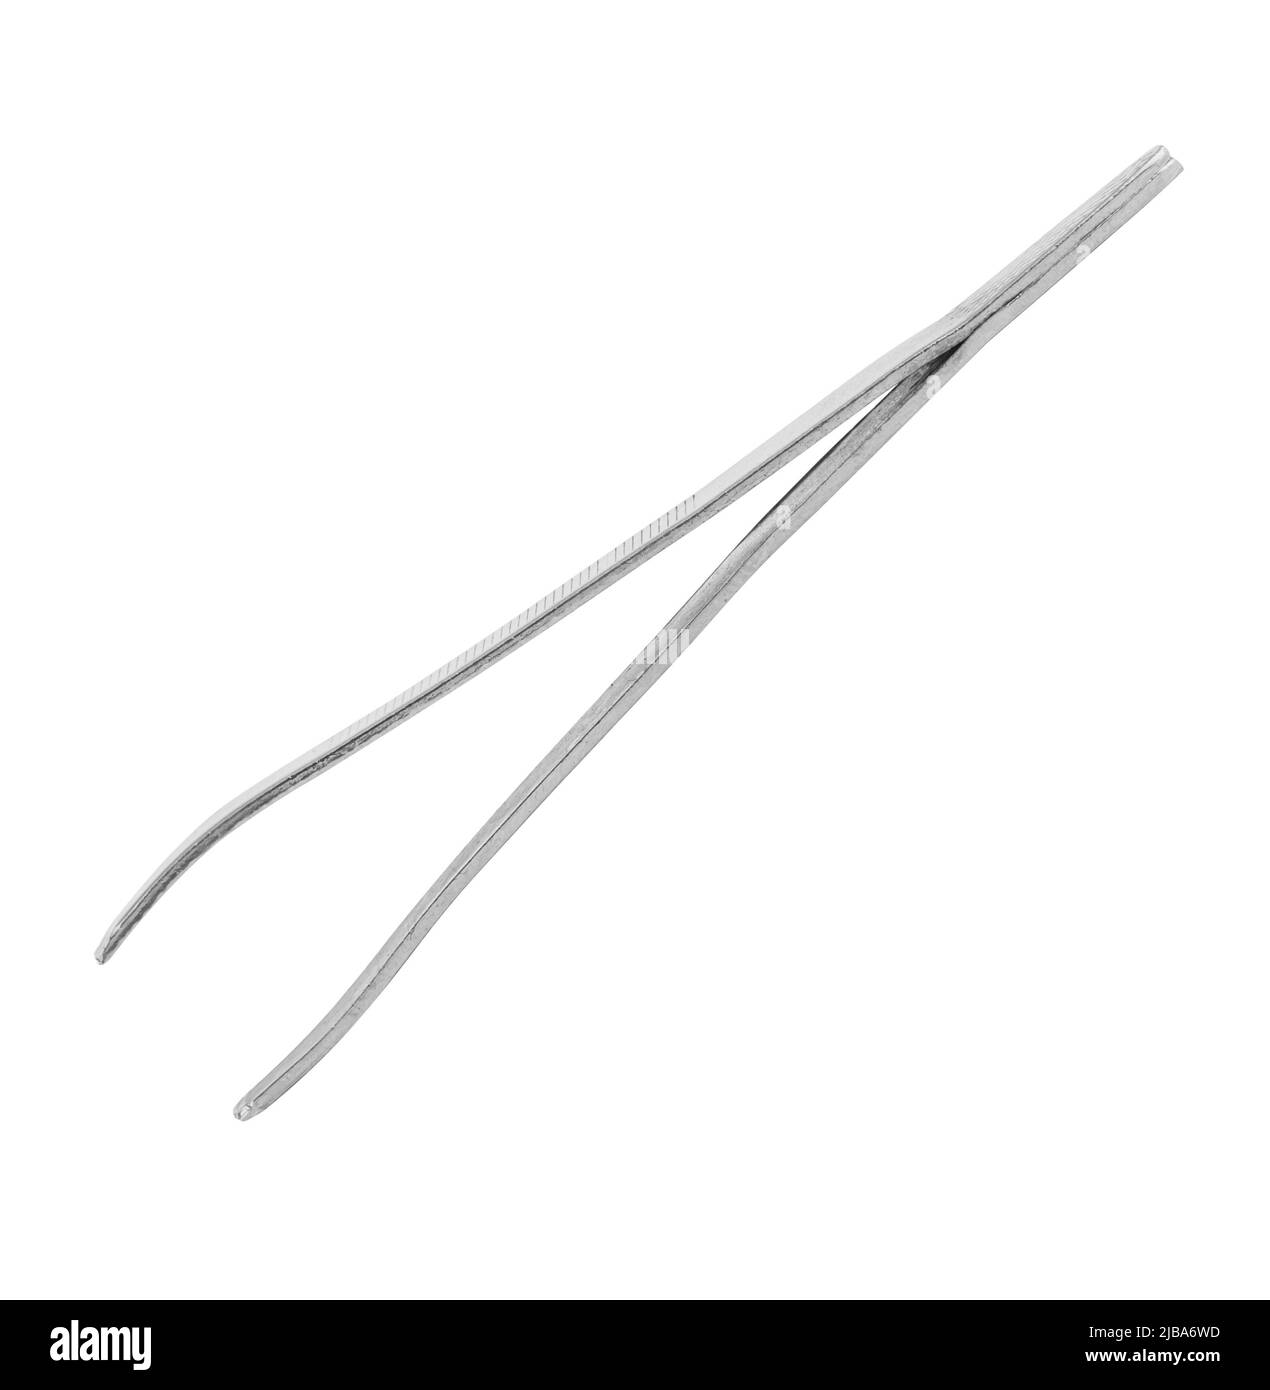 Eyebrow tweezers, cosmetic accessory, on a white background isolated Stock Photo